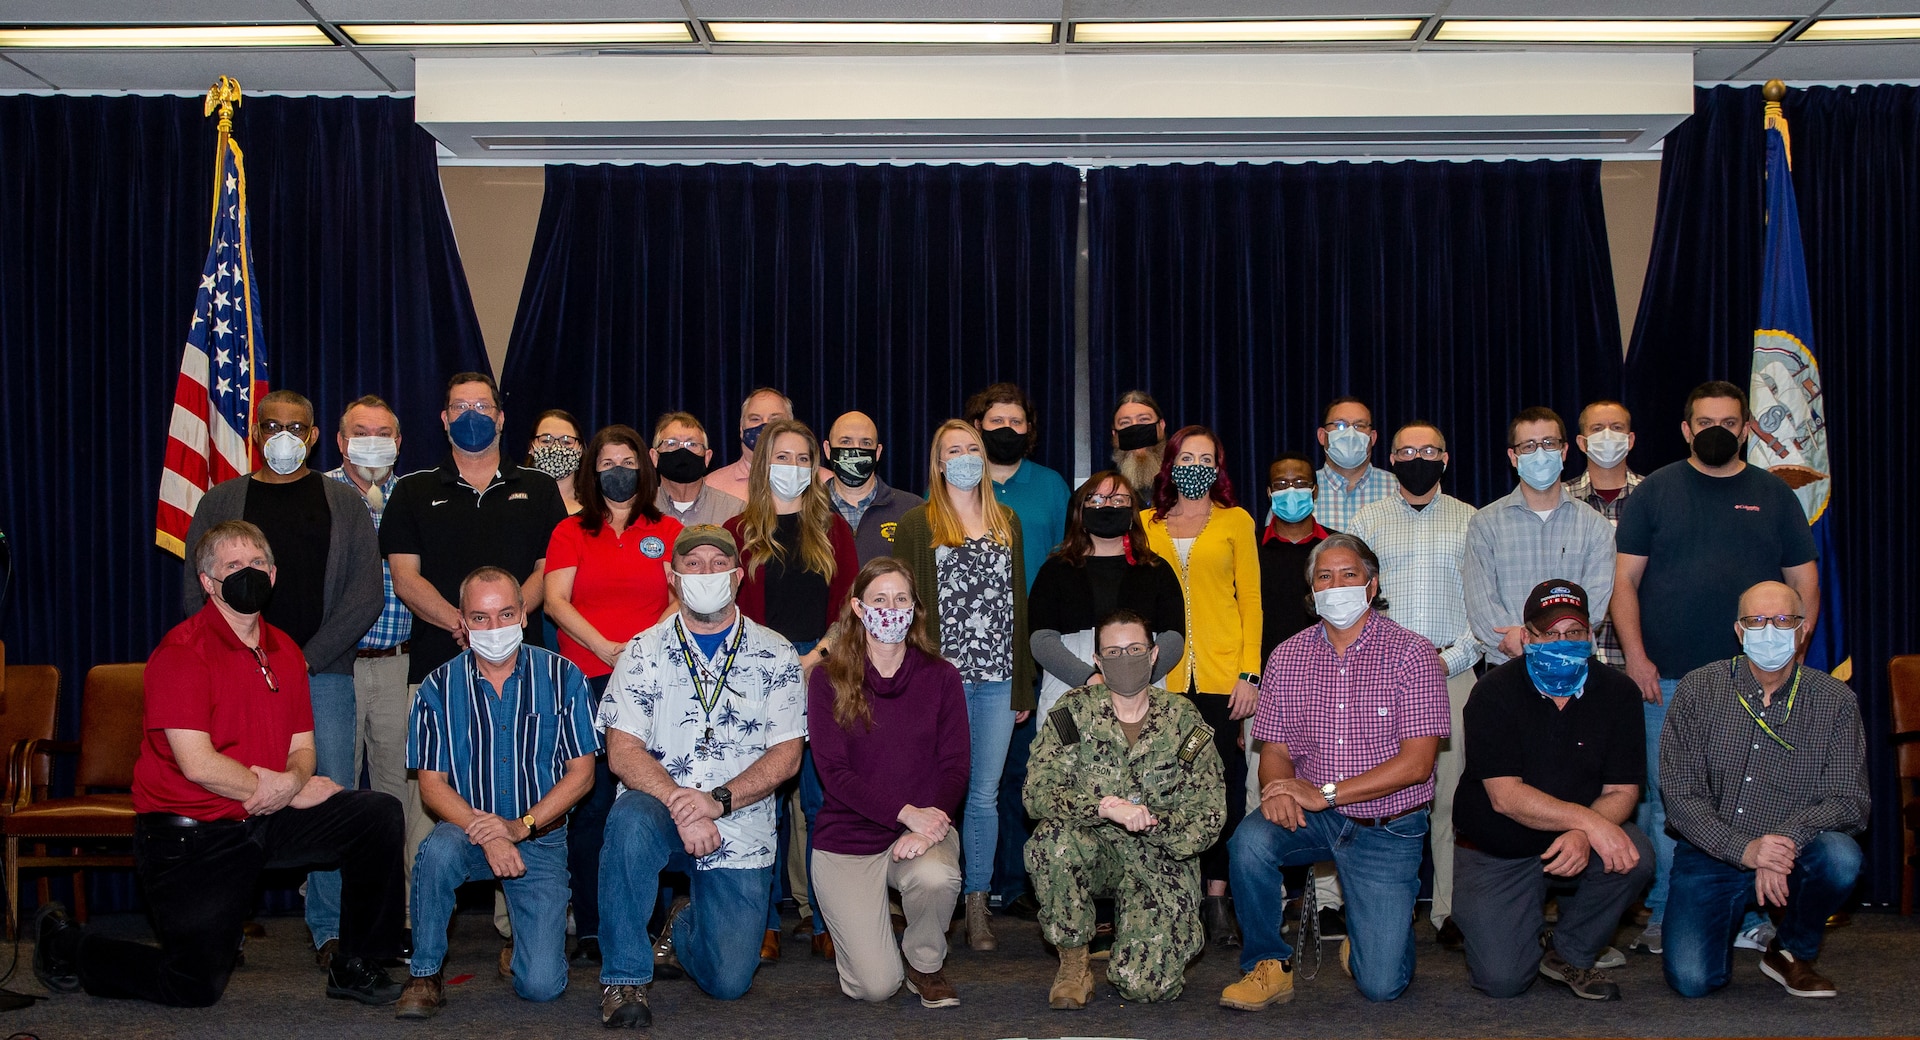 The Norfolk Naval Shipyard (NNSY) auditors were recently awarded BZ100s for their efforts to support the Corporate Special Emphasis Programs. Learn more about them in this article by NNSY's SUBSAFE Program Director John Finefield.